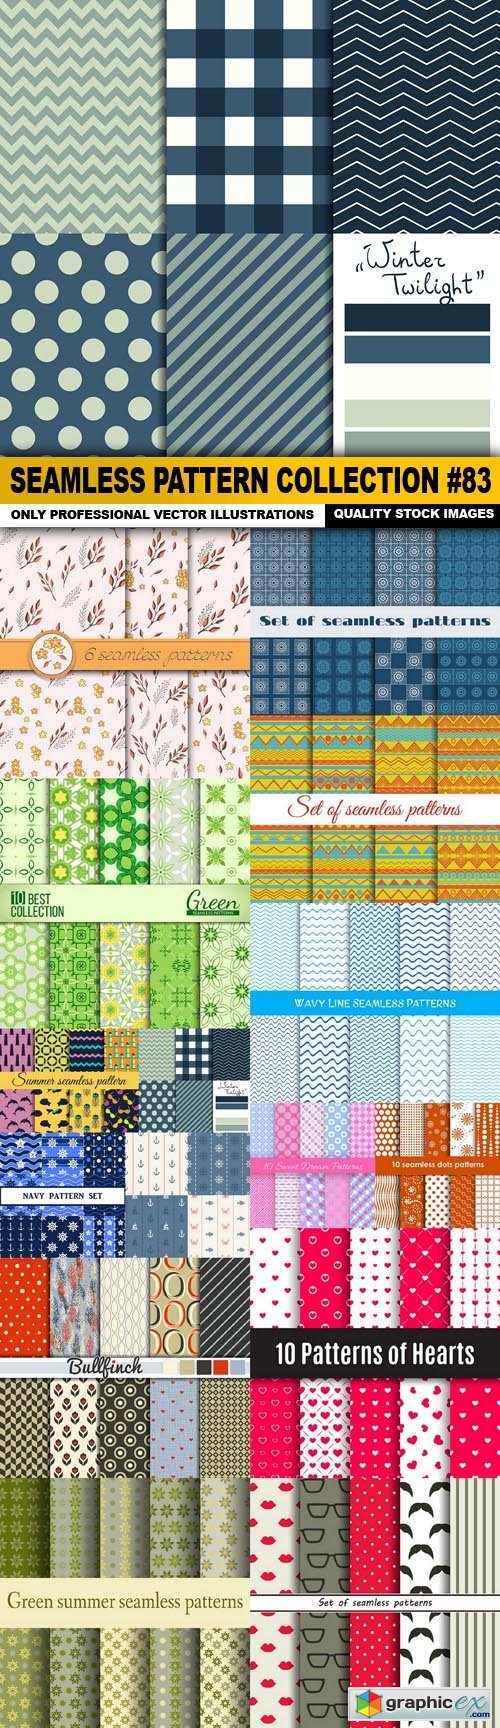 Seamless Pattern Collection #83